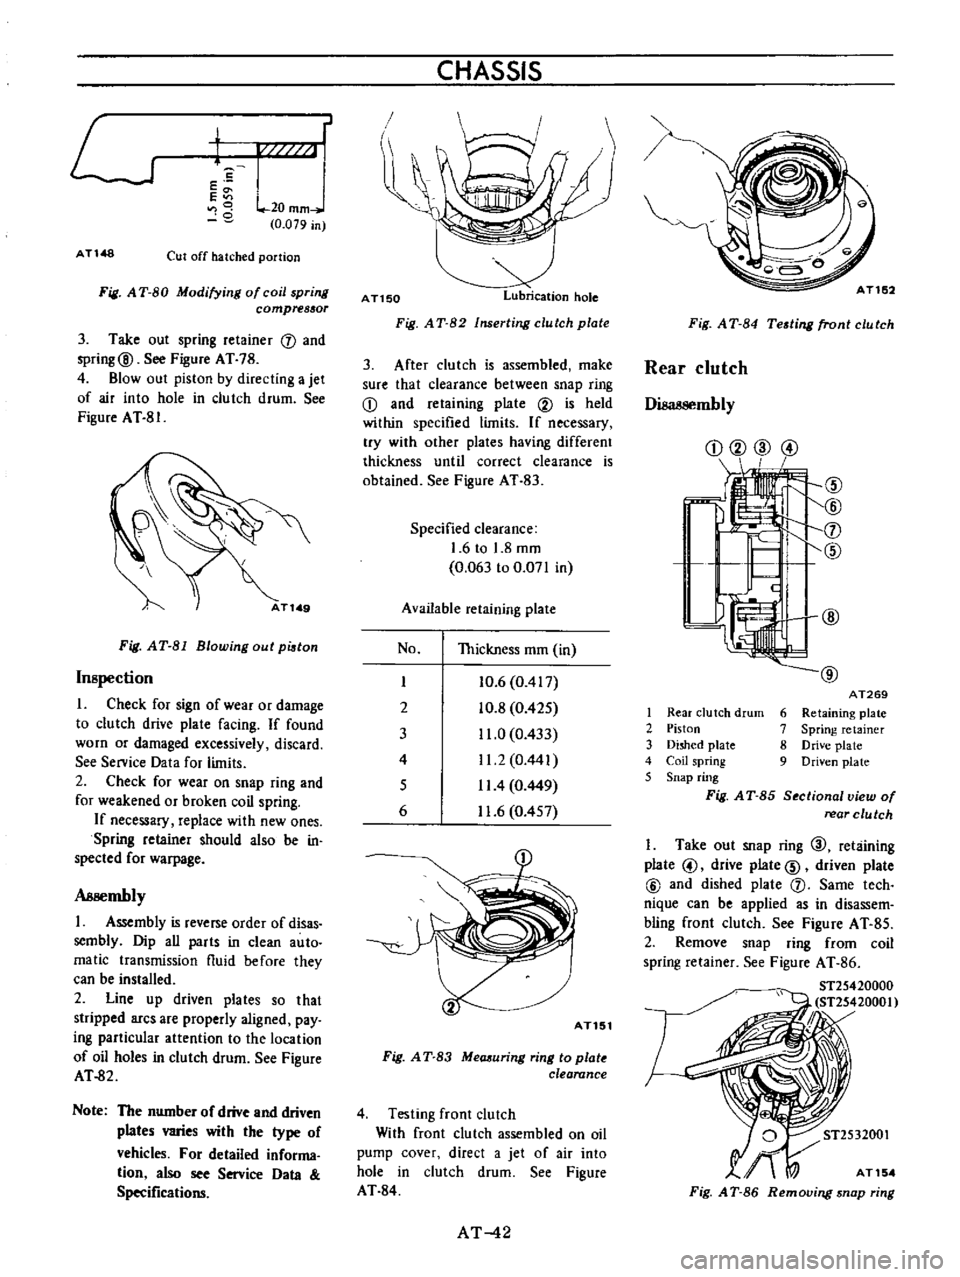 DATSUN B110 1973  Service Repair Manual 
L 
J

i

C

E

Ee

1f

20mm

8

0

079 
in

AT148

Cut 
off 
hatched

portion

Fig 
A 
T 
80

Modifying 
of 
coil

spring

compres 
or

3

Take 
out

spring 
retainer

j 
and

spring@ 
See

Figure 
A